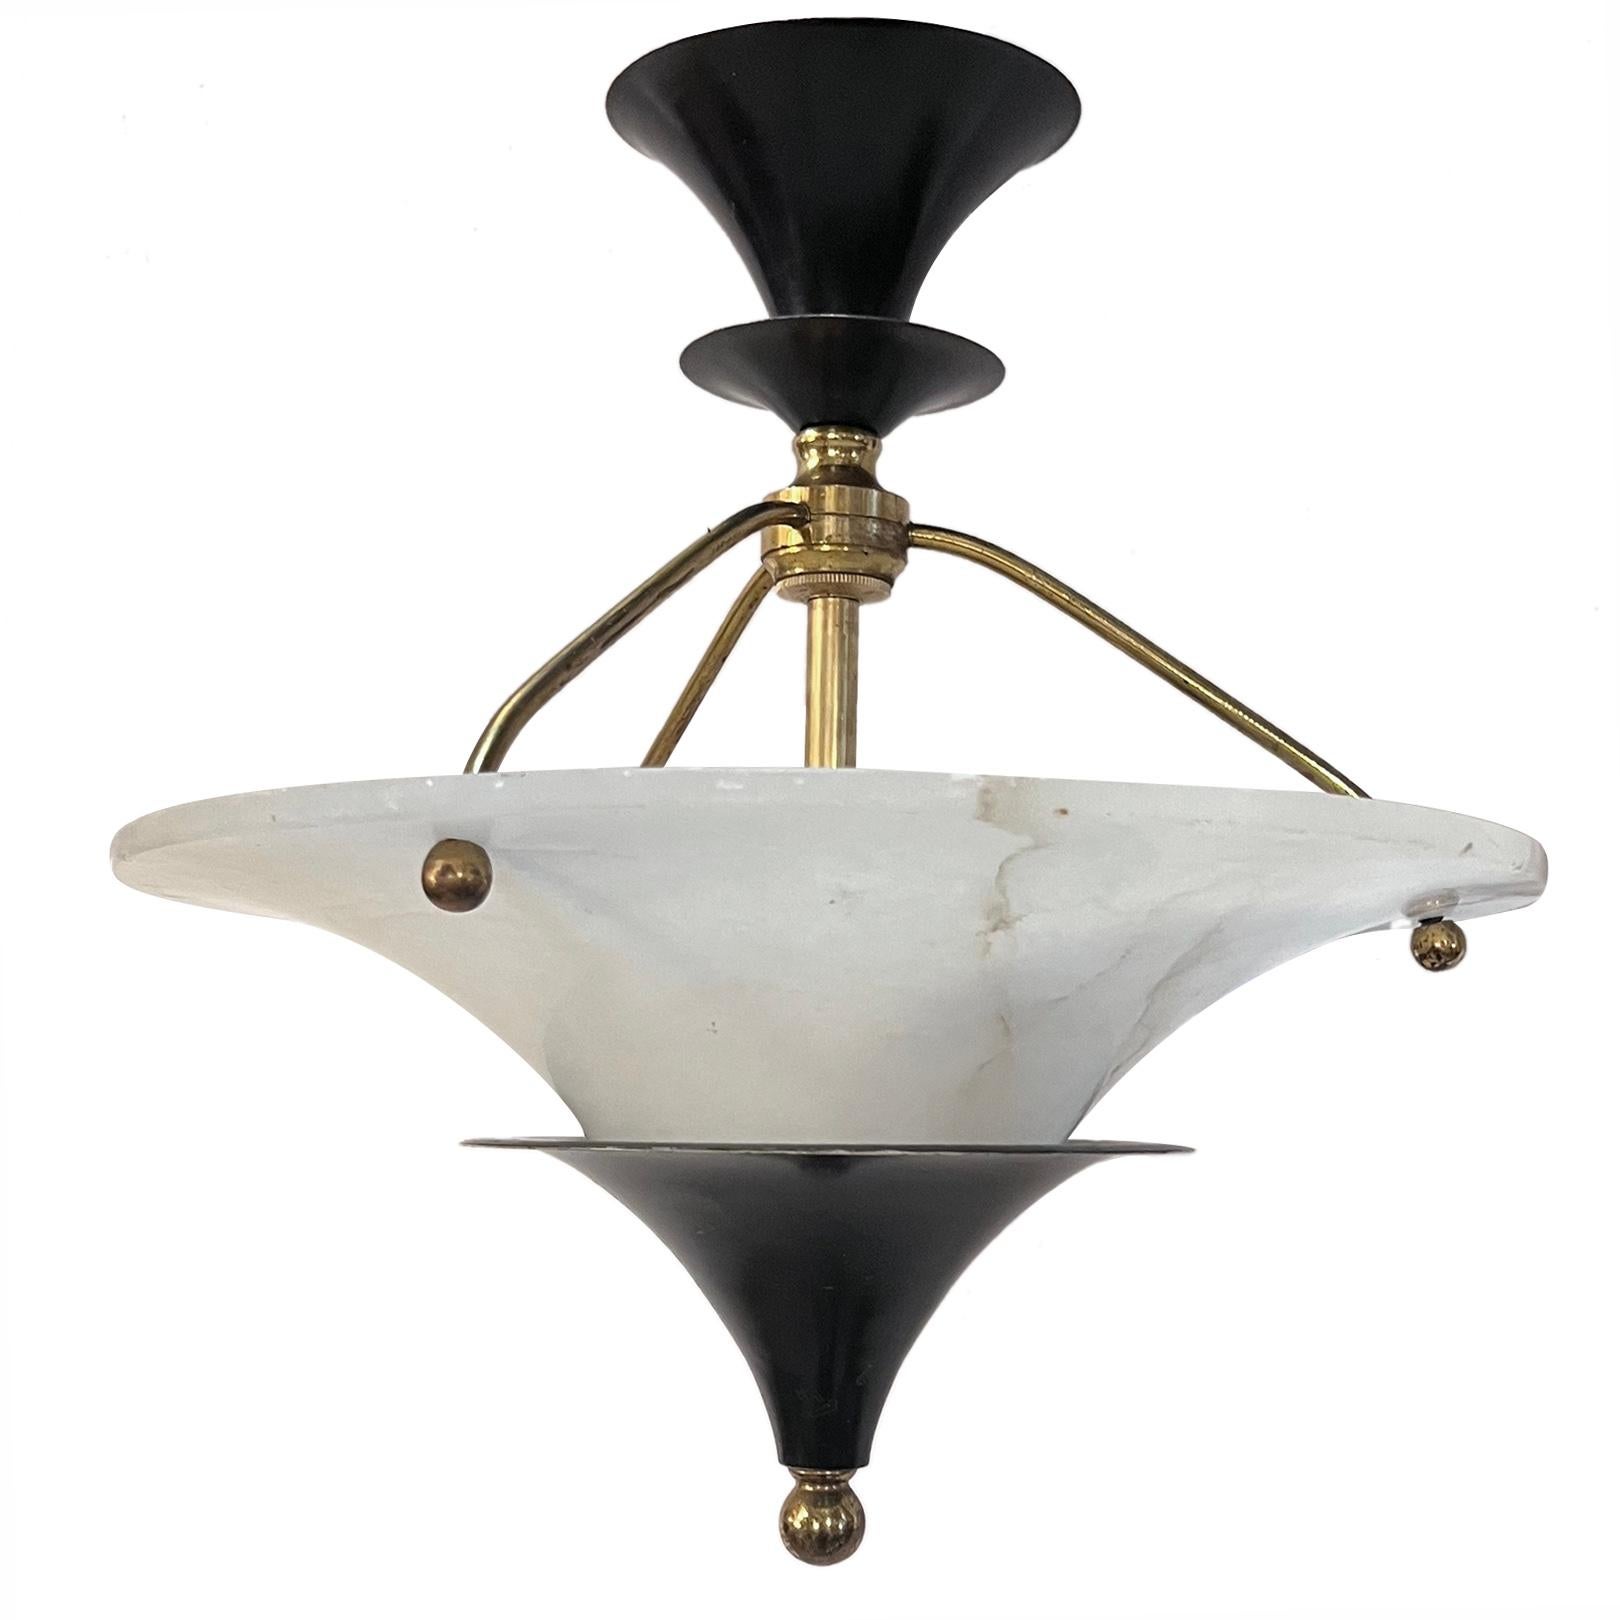 A circa 1930s French alabaster pendant light fixture with tole body.

Measurements:
Present drop: 20